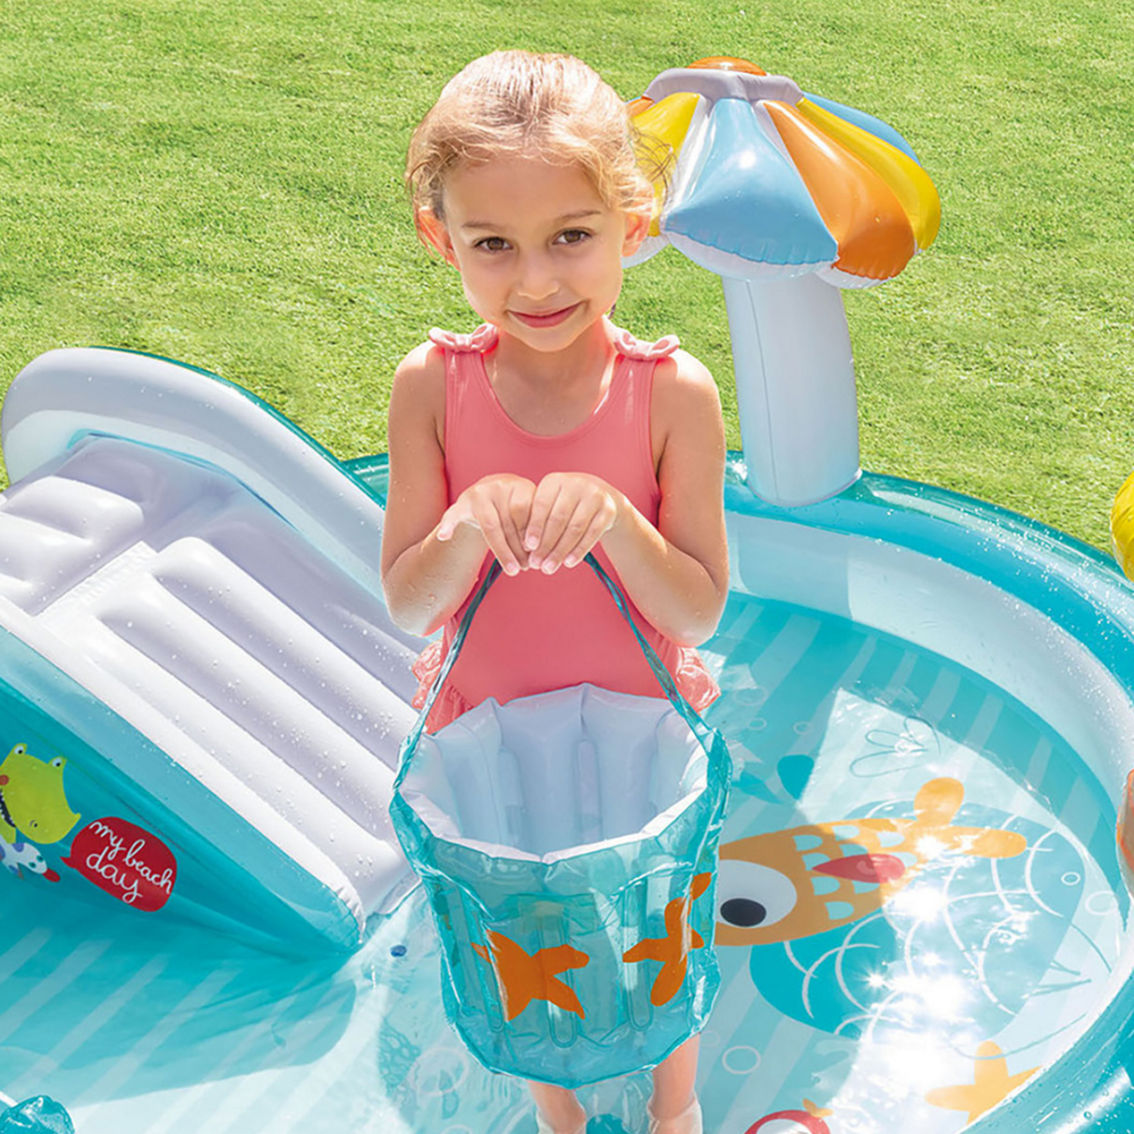 Intex Gator Inflatable Pool Play Center - Image 4 of 6